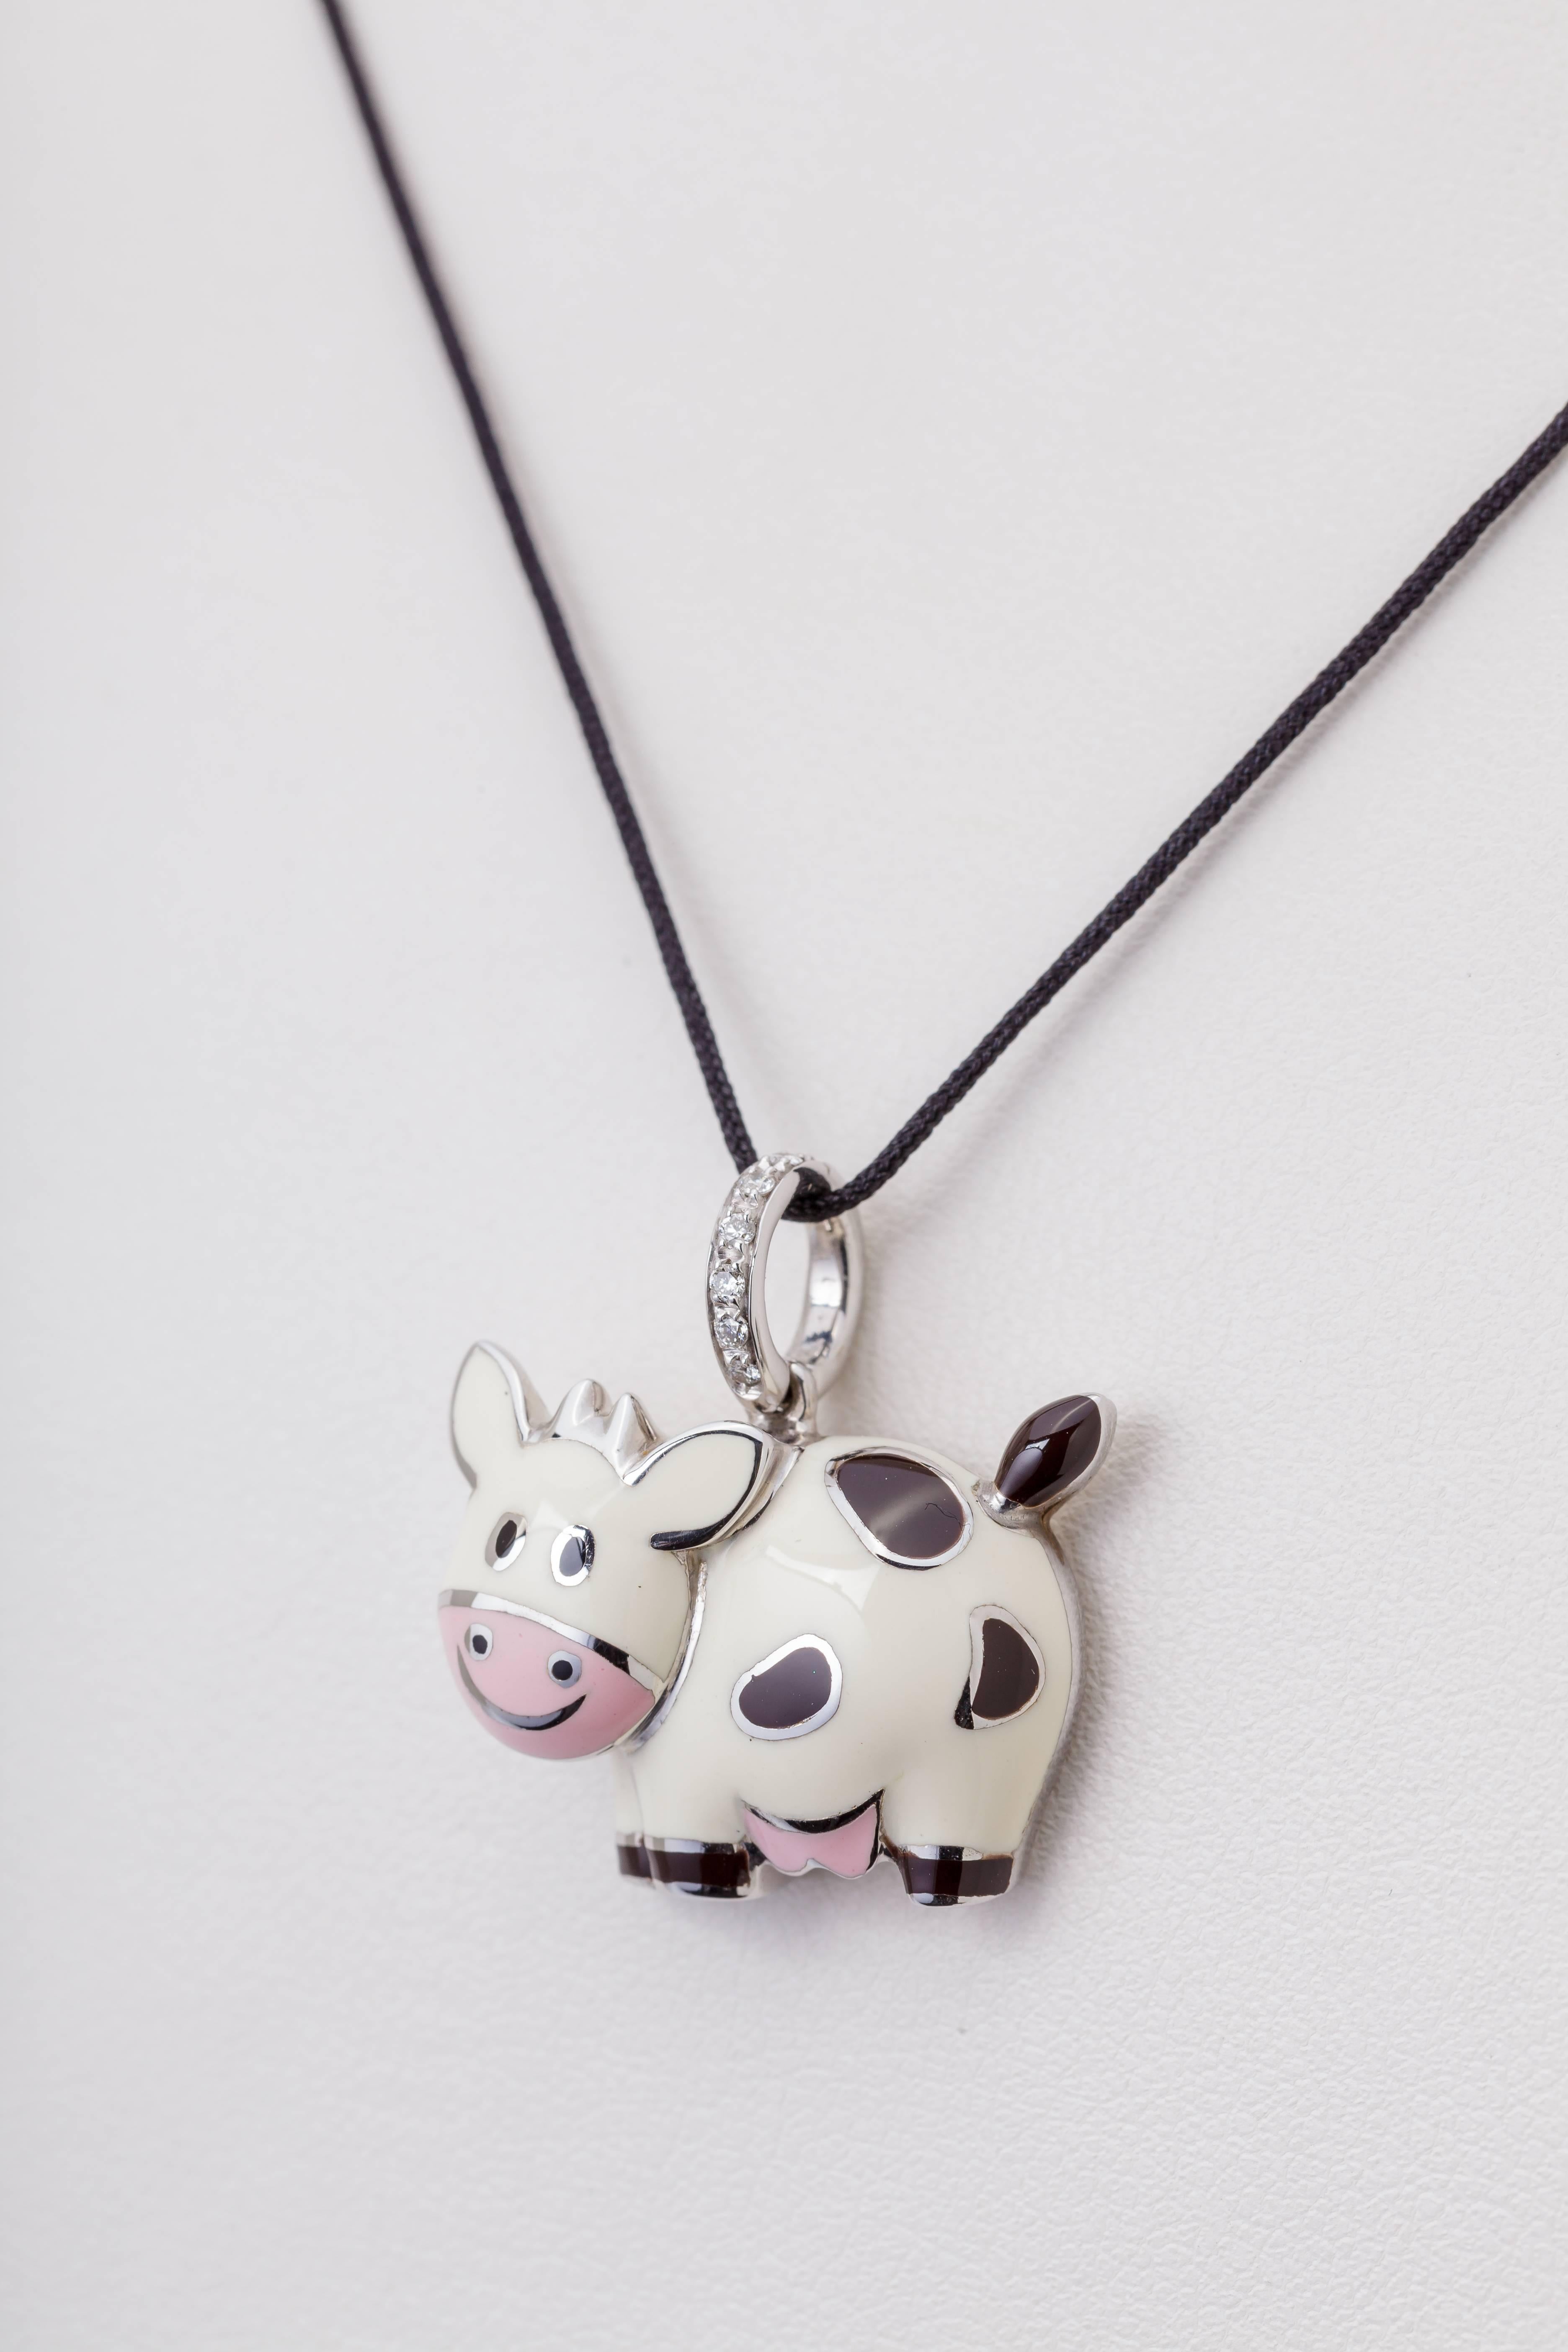 This Aaron Basha cow dangle charm is 18k white gold with enamel.  The bail is set with diamonds totaling 0.06ct.